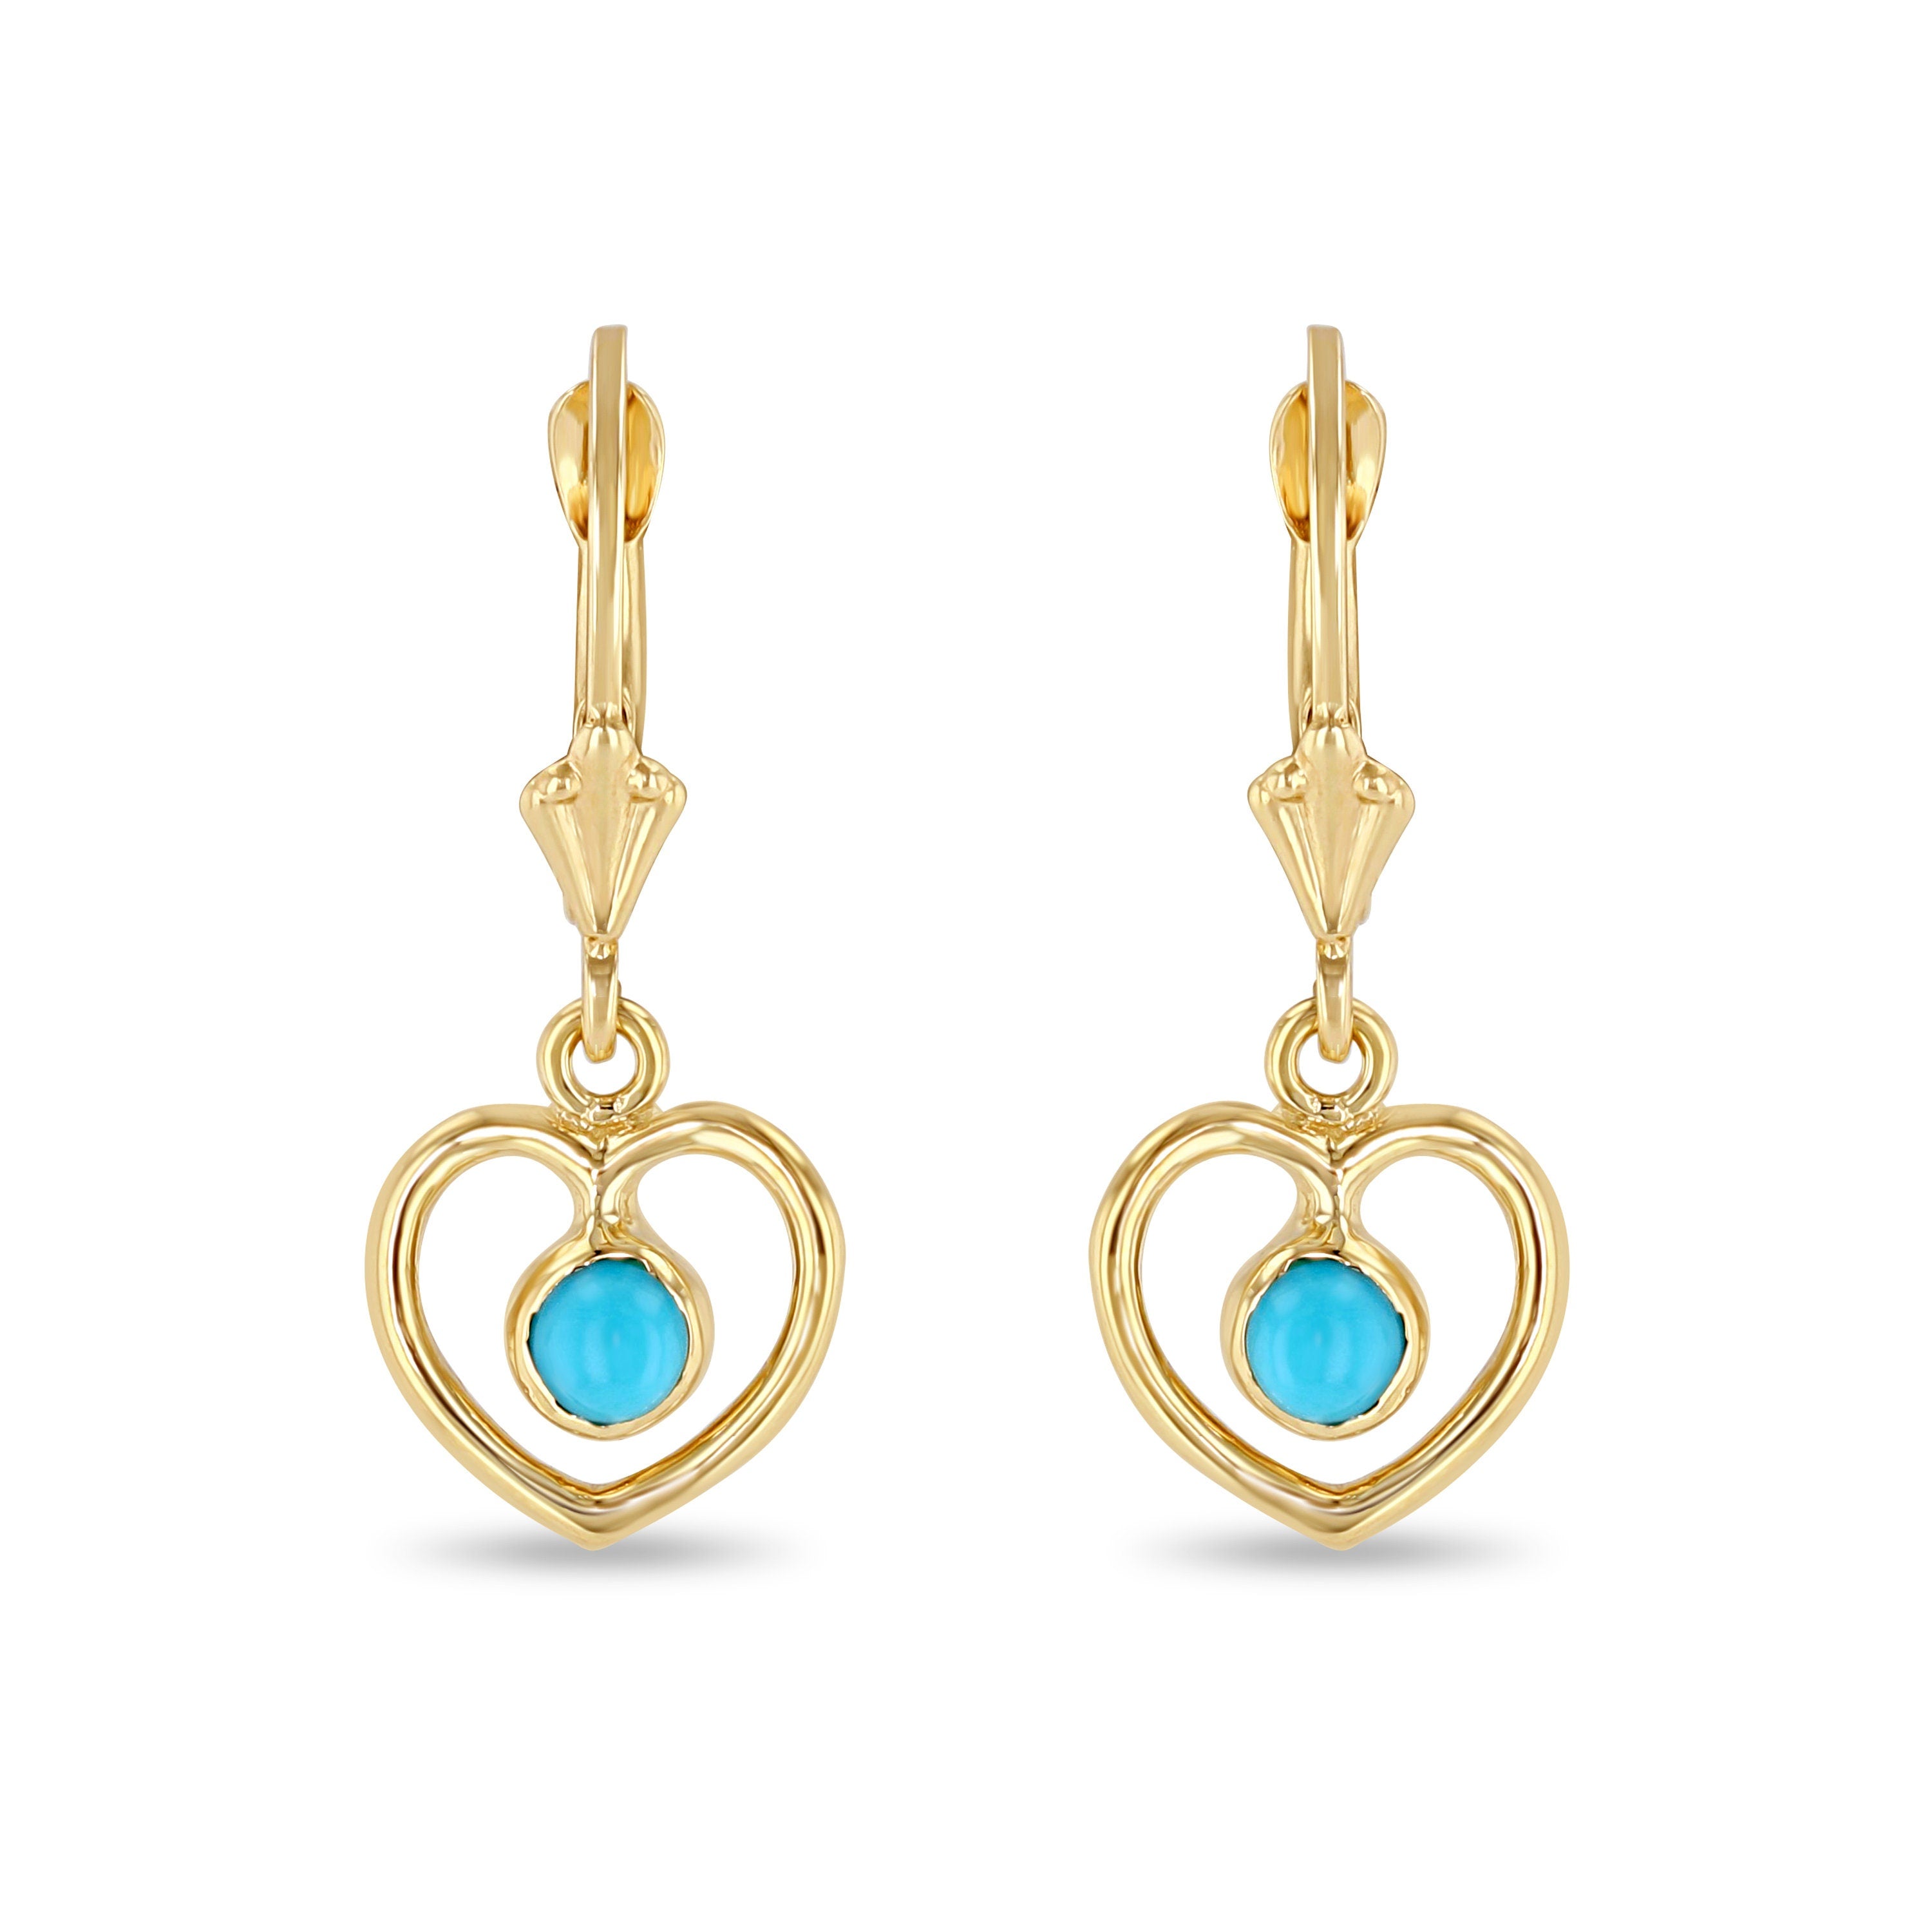 14k solid gold heart earrings on fleur de lis lever backs with genuine turquoise stone